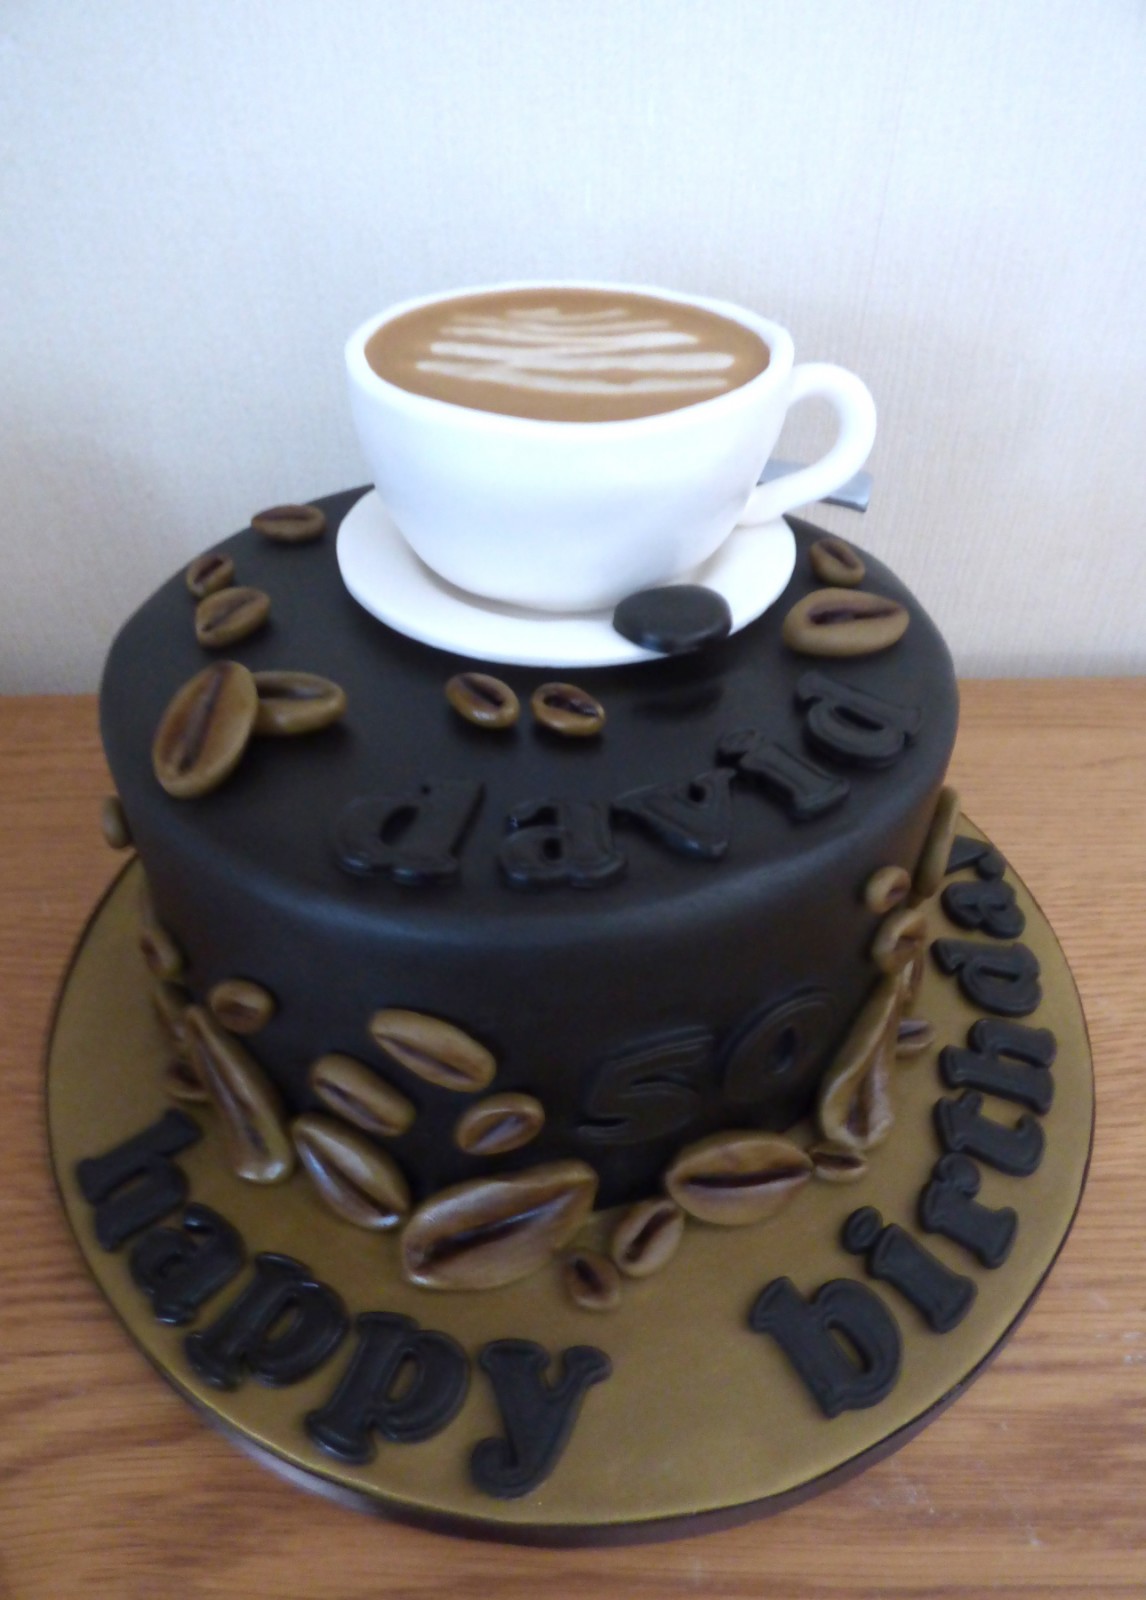 Coffee Lover's Cake with Creamy Chocolate Frosting - Liv B.